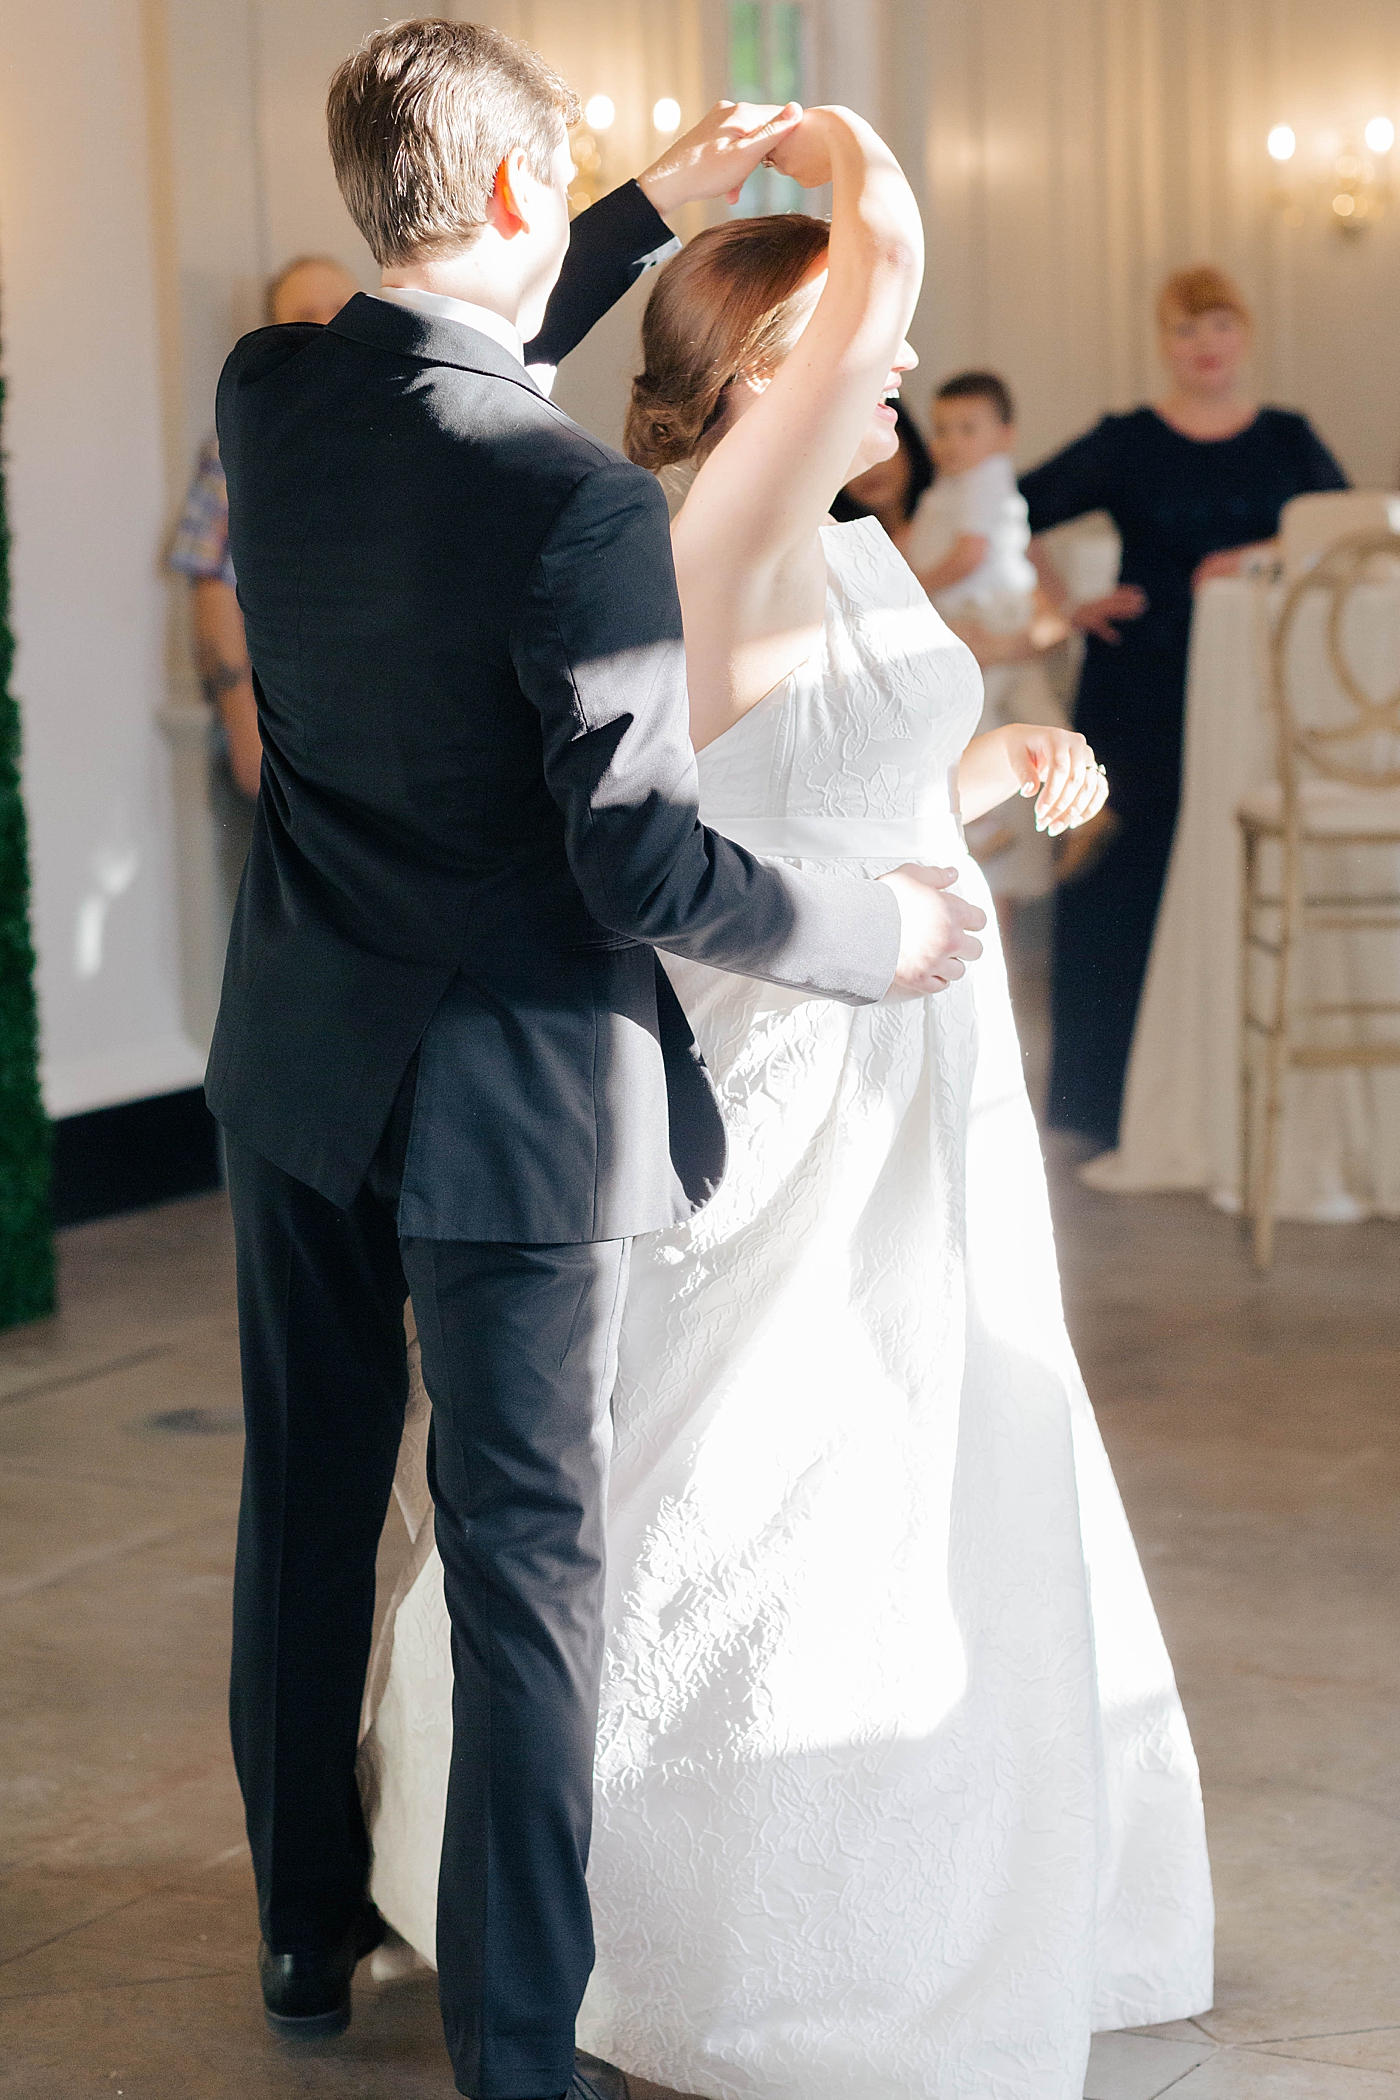 Bride and groom dancing during their Intimate spring wedding | Carters Event Co